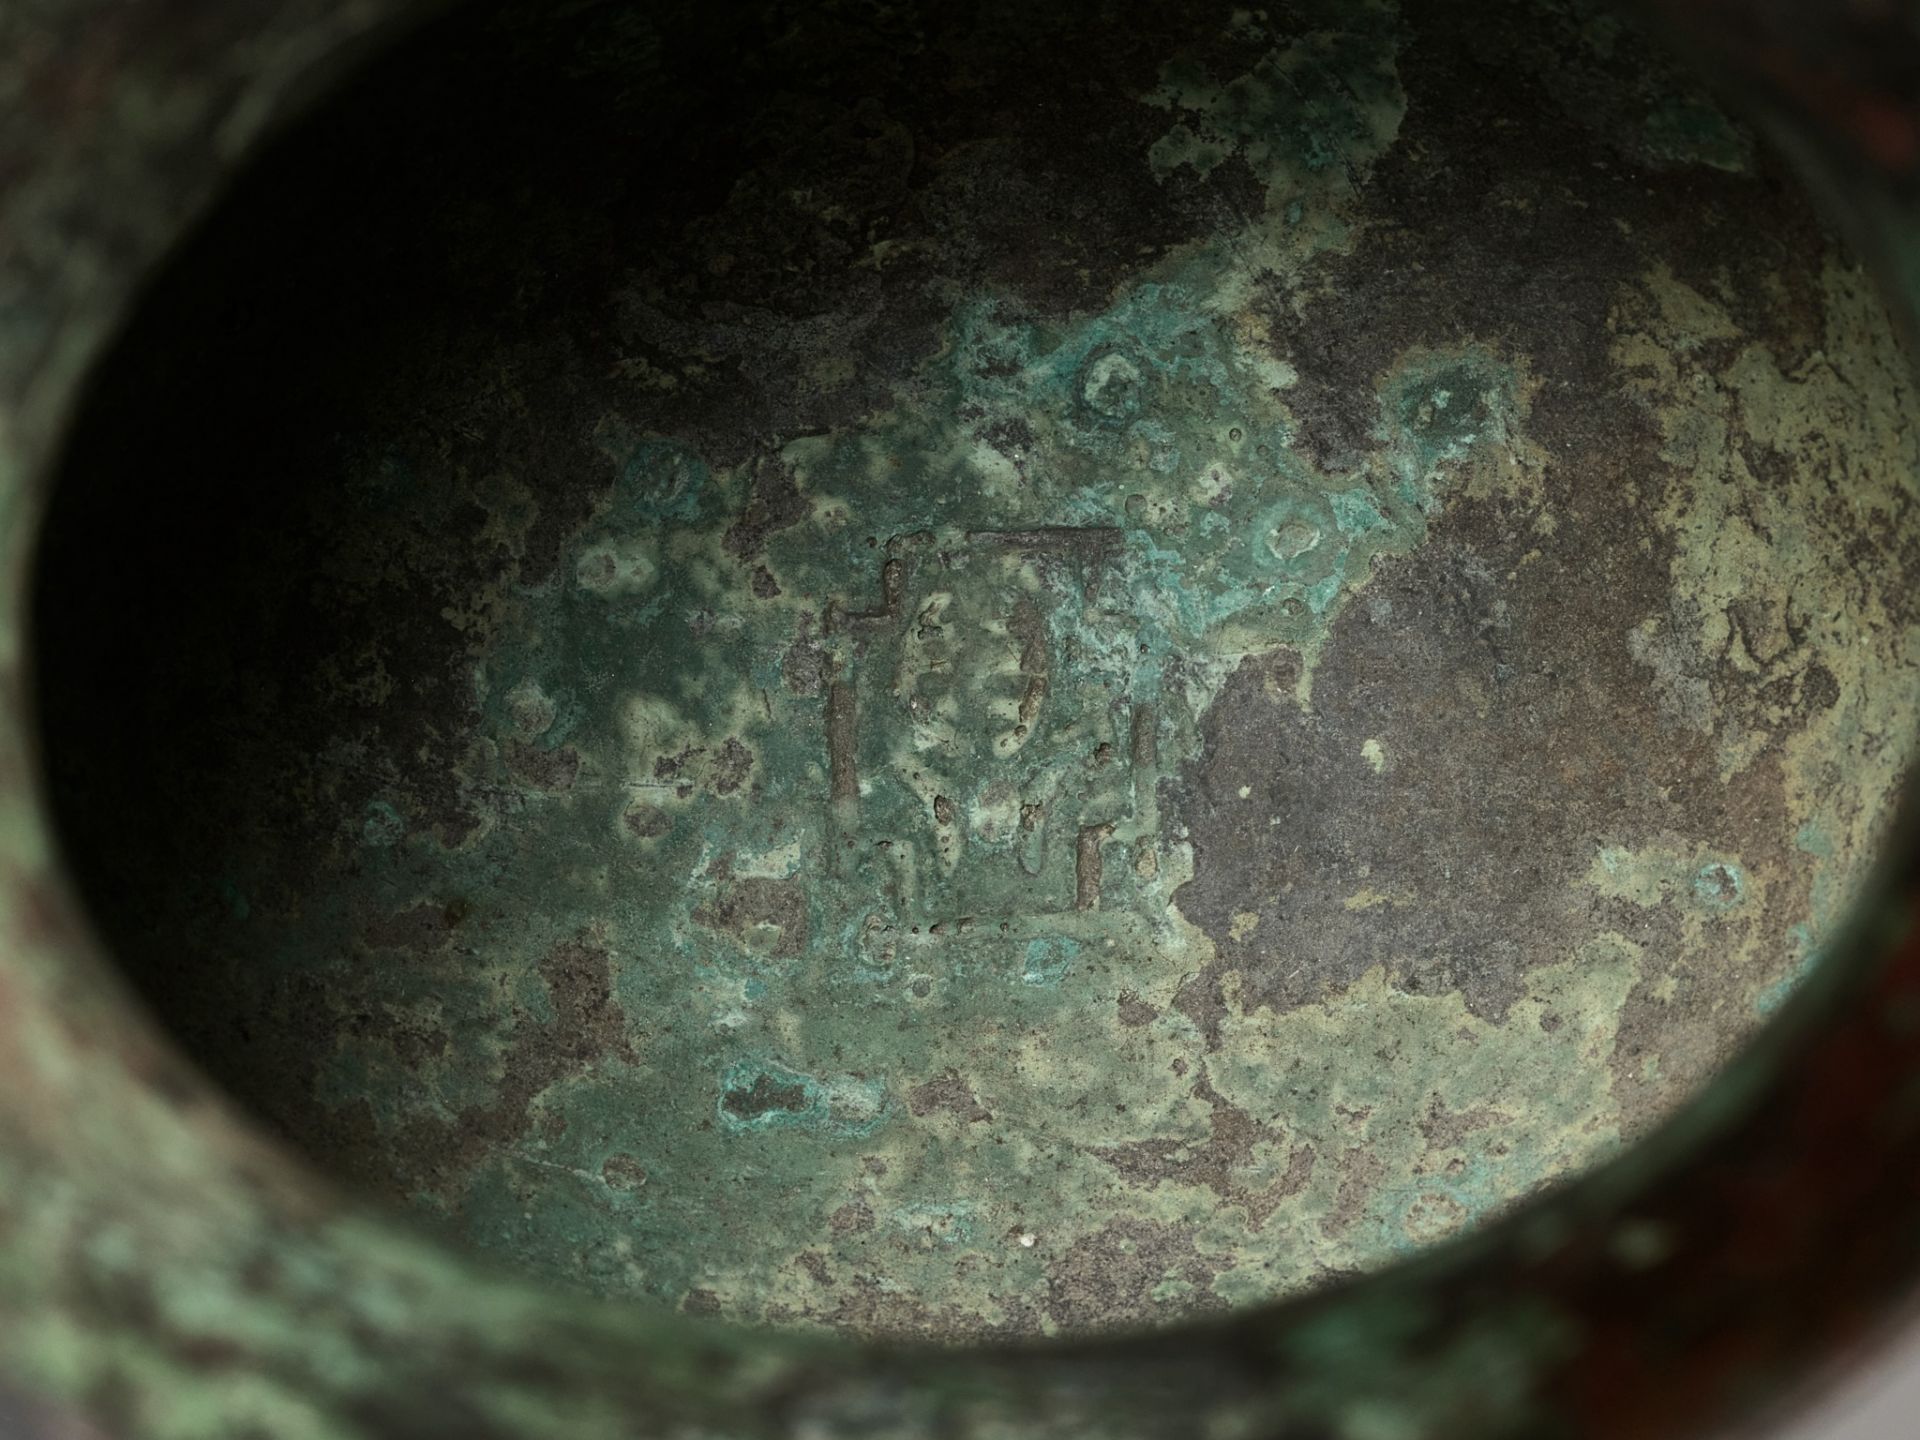 A RARE BRONZE RITUAL WINE VESSEL, ZHI, SHANG DYNASTY, CHINA, 13TH-12TH CENTURY BC - Image 3 of 25